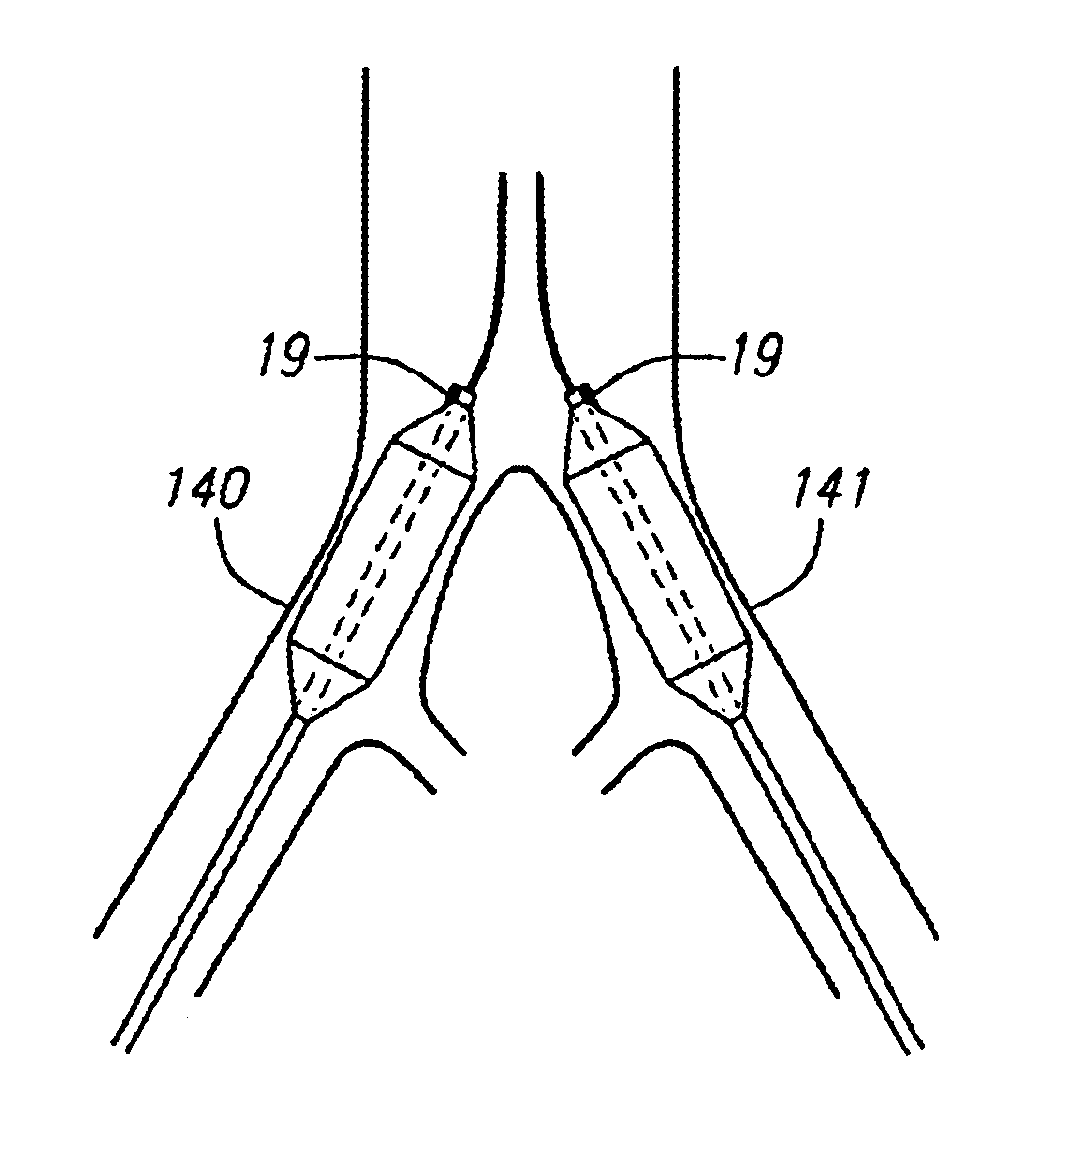 Devices and methods for cerebral perfusion augmentation